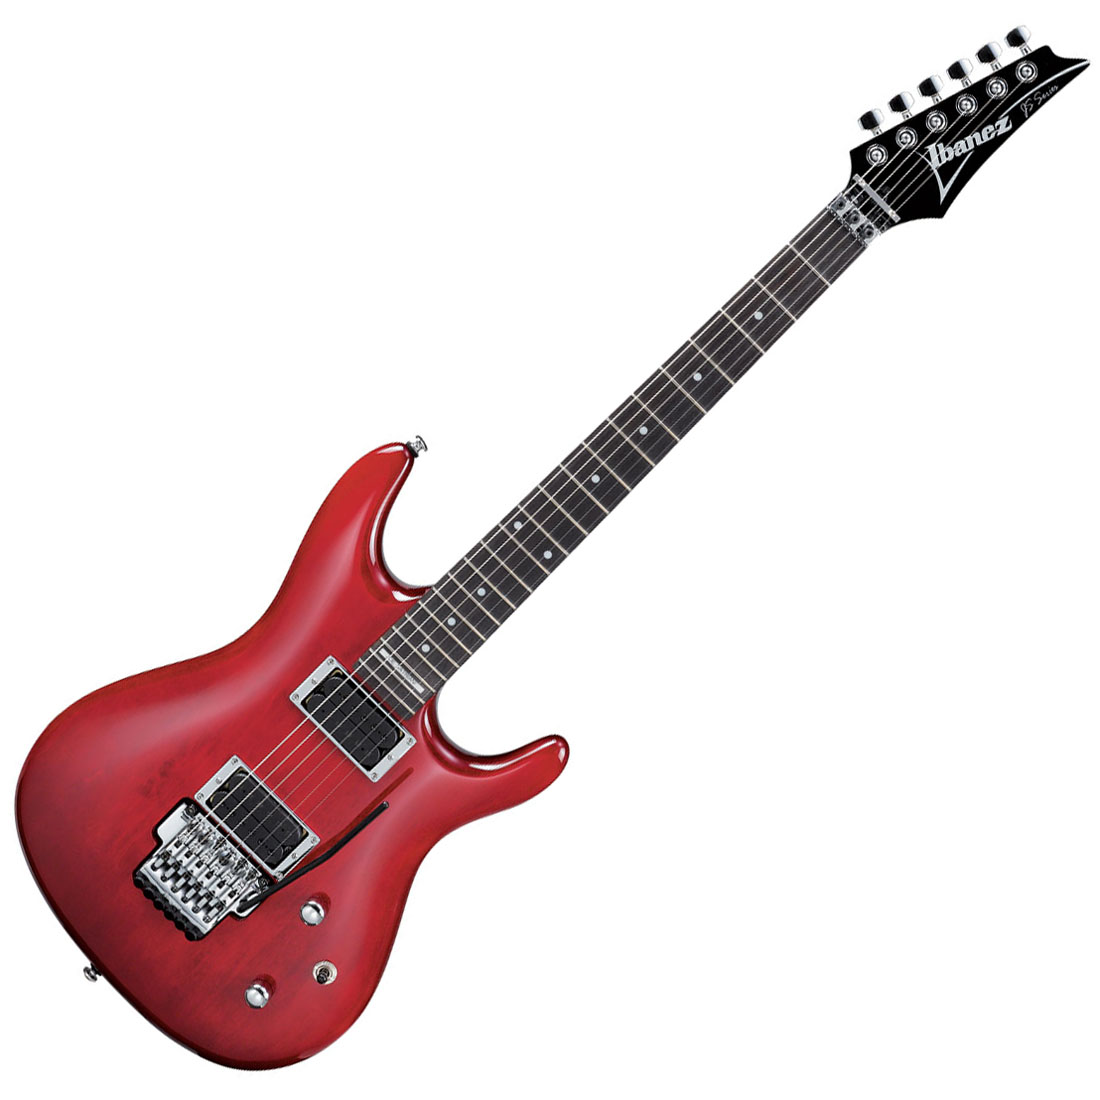 Ibanez Guitar 16036 Hd Wallpapers in Music   Imagescicom